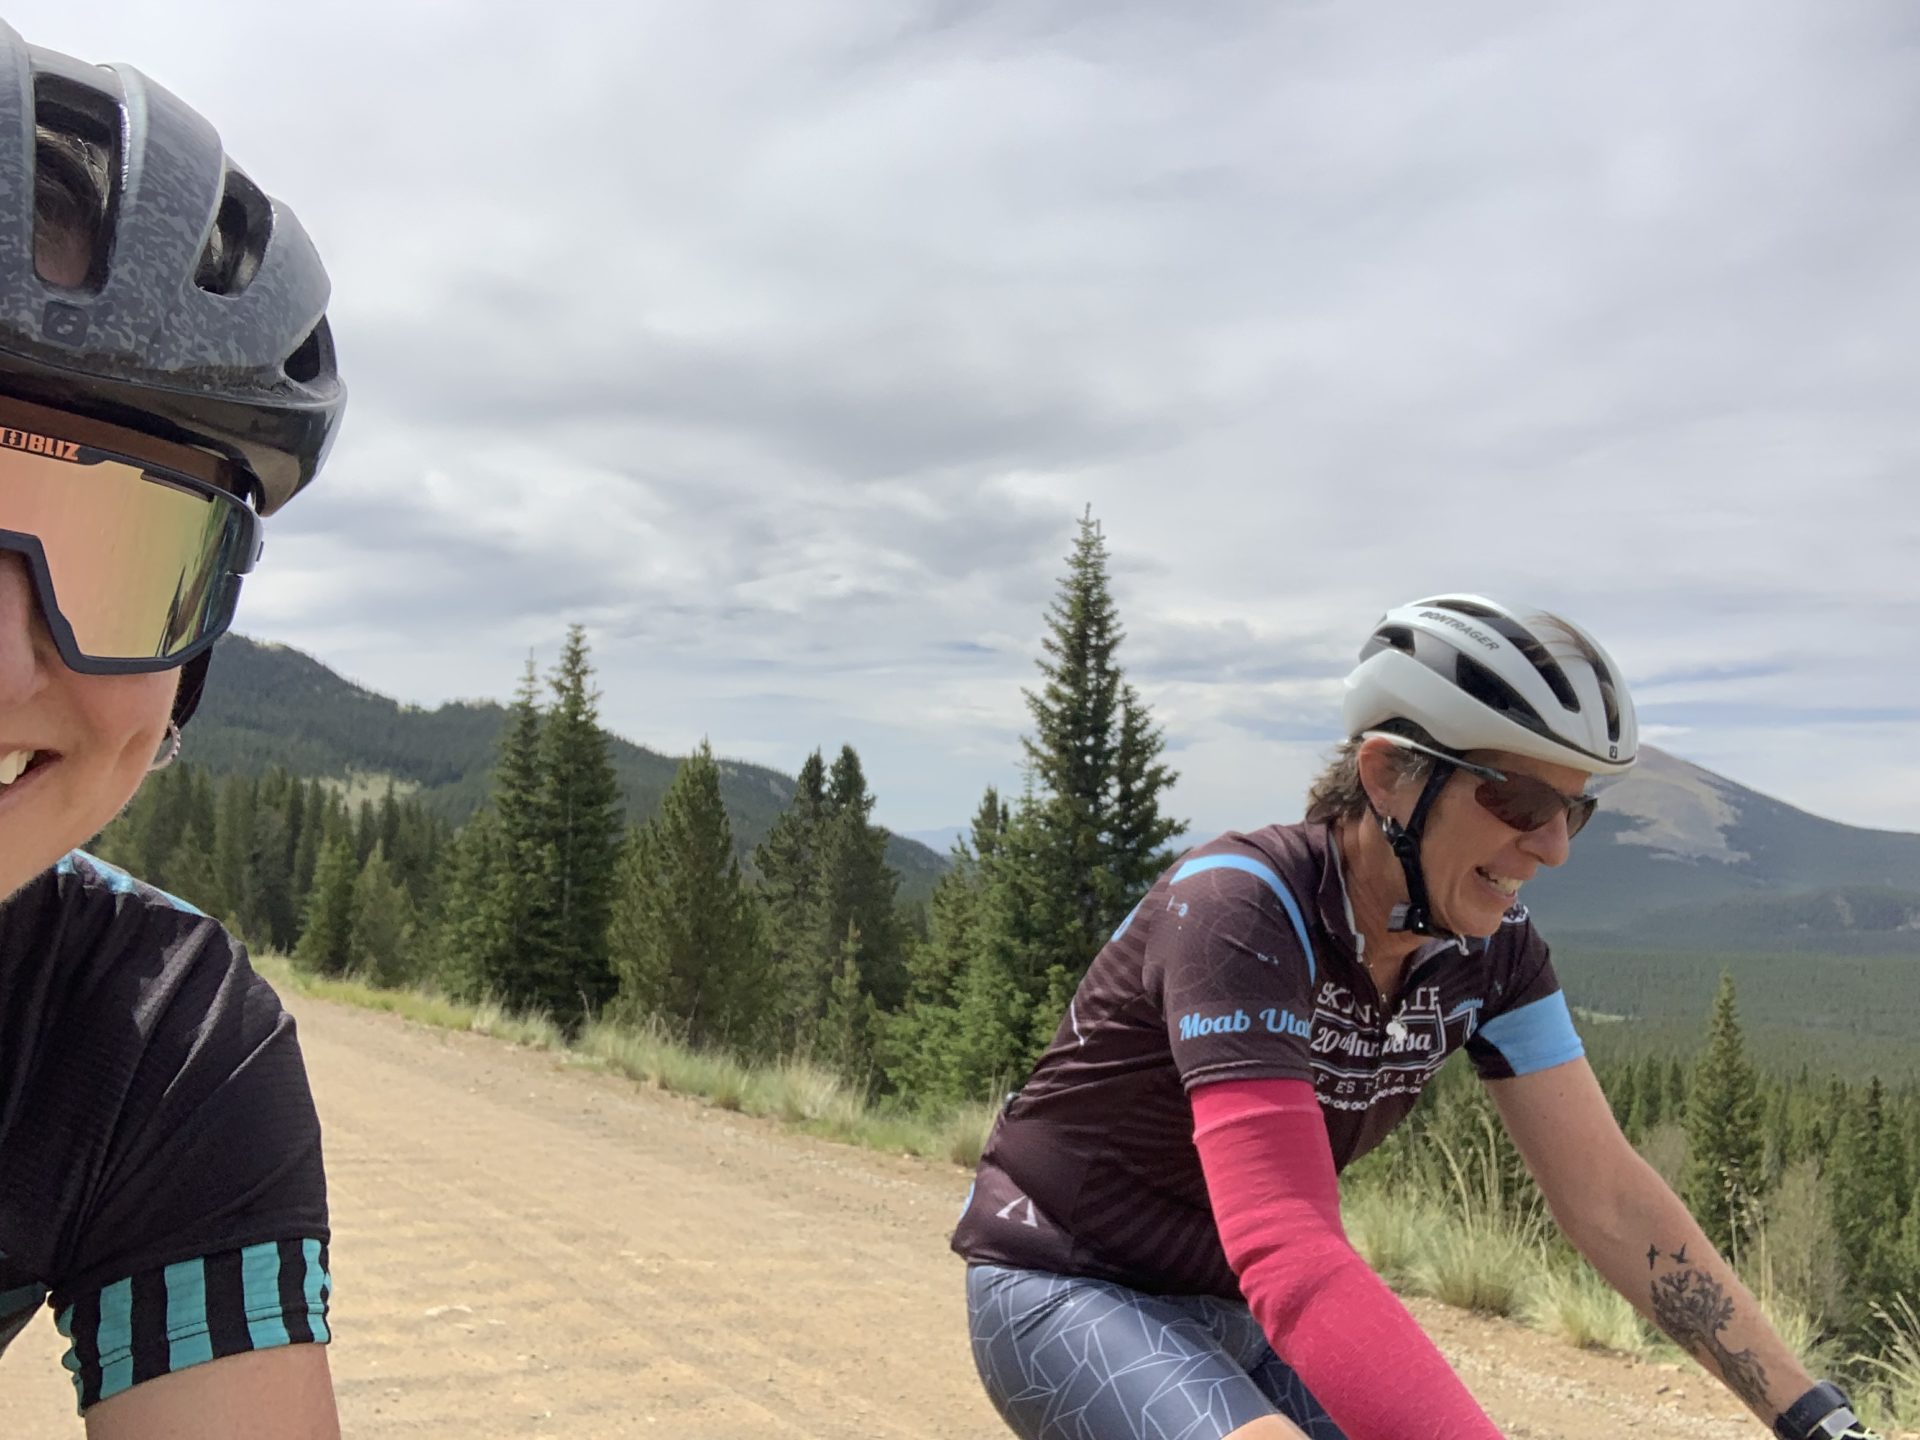 Mary and Nadine wearing riding kits and helmets ride bikes on gravel.